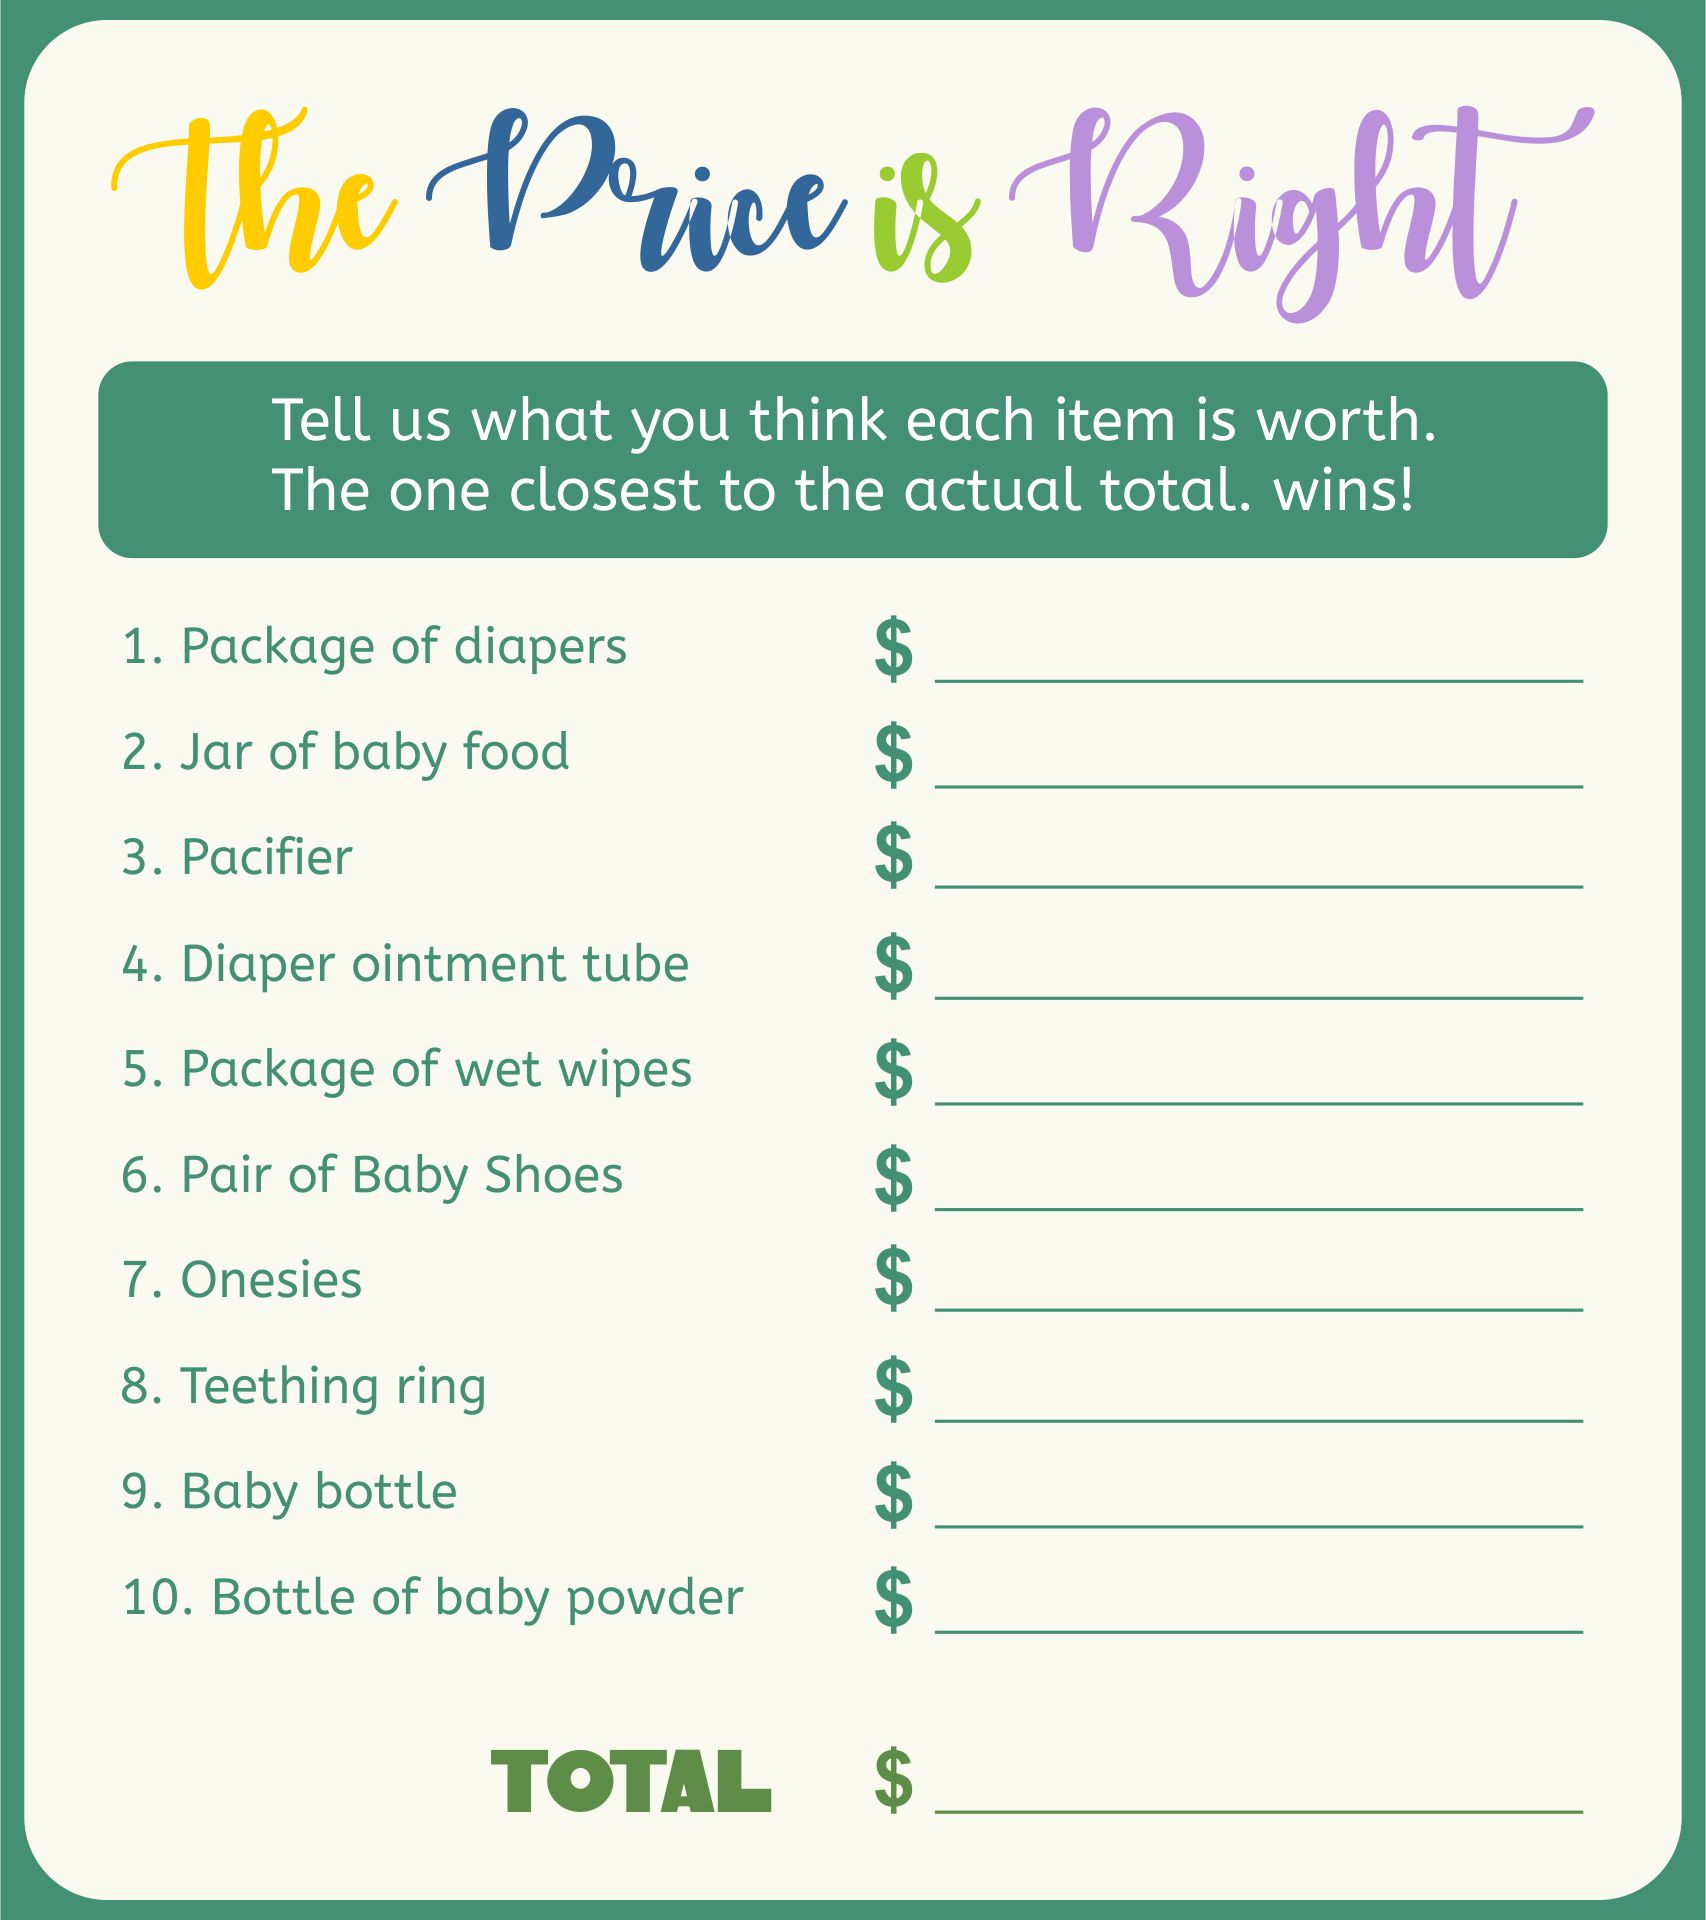 price-is-right-baby-shower-game-uk-baby-shower-price-is-right-large